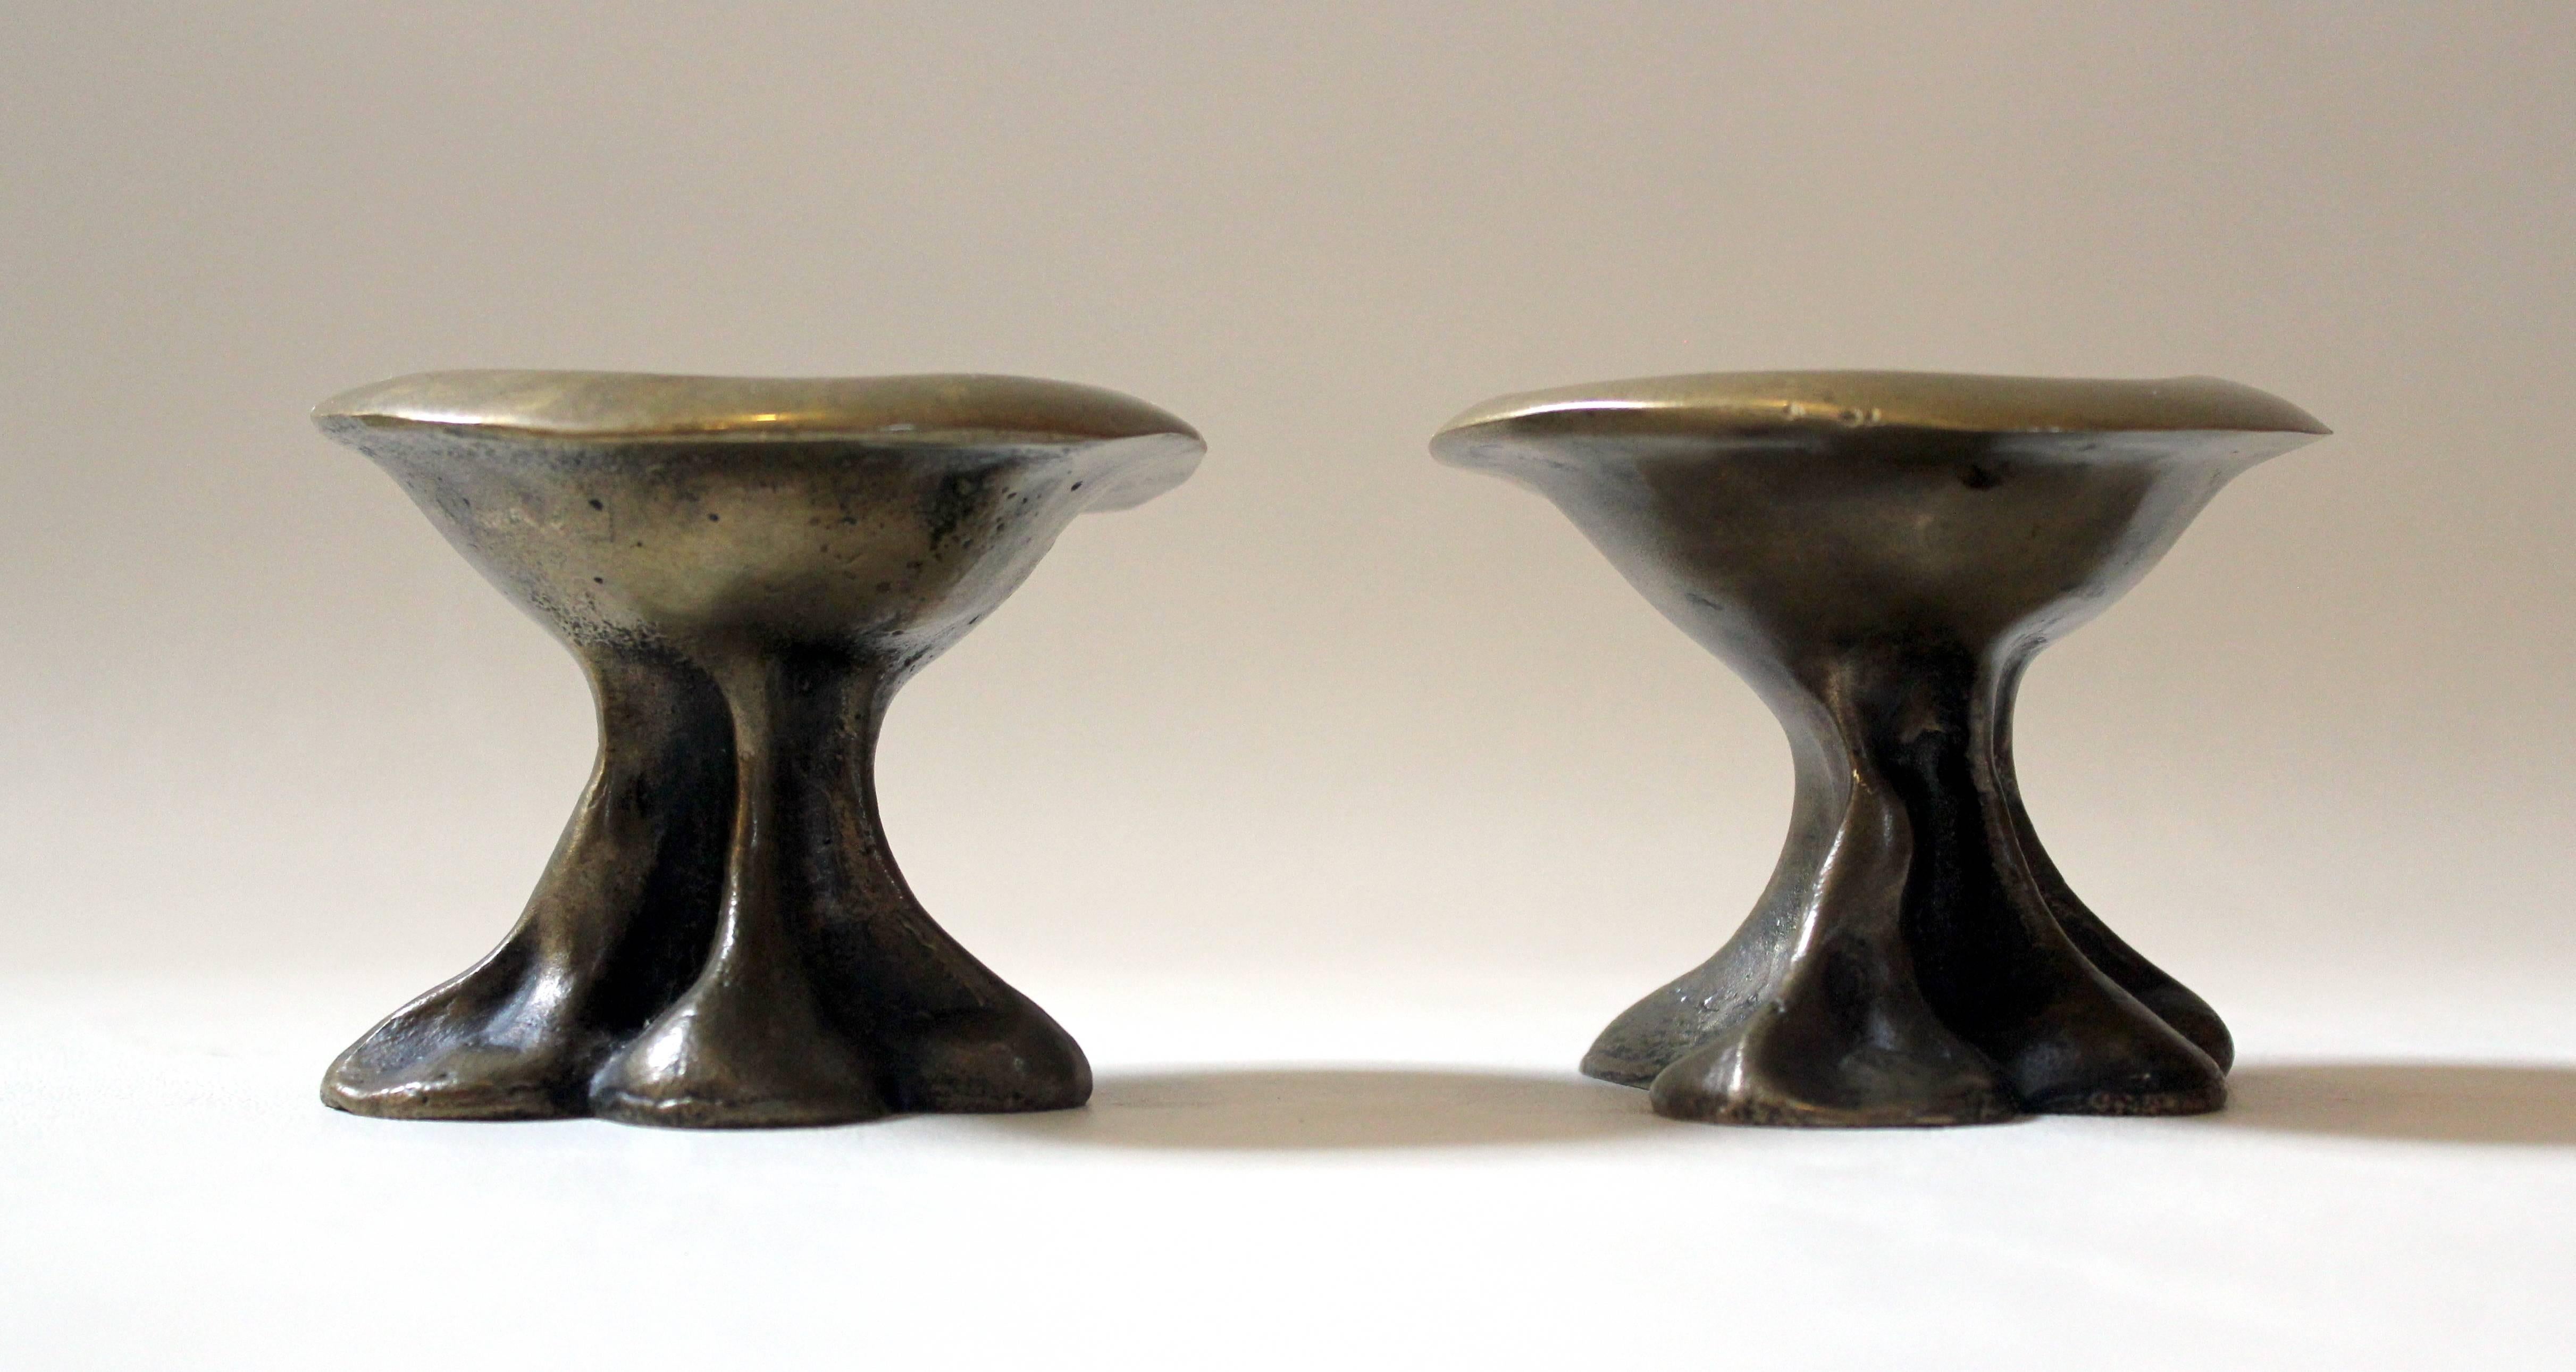 Pair of brass Brutalist-style decorative mushrooms. Can be used as decorative items or small receptacles or votive candle holders.